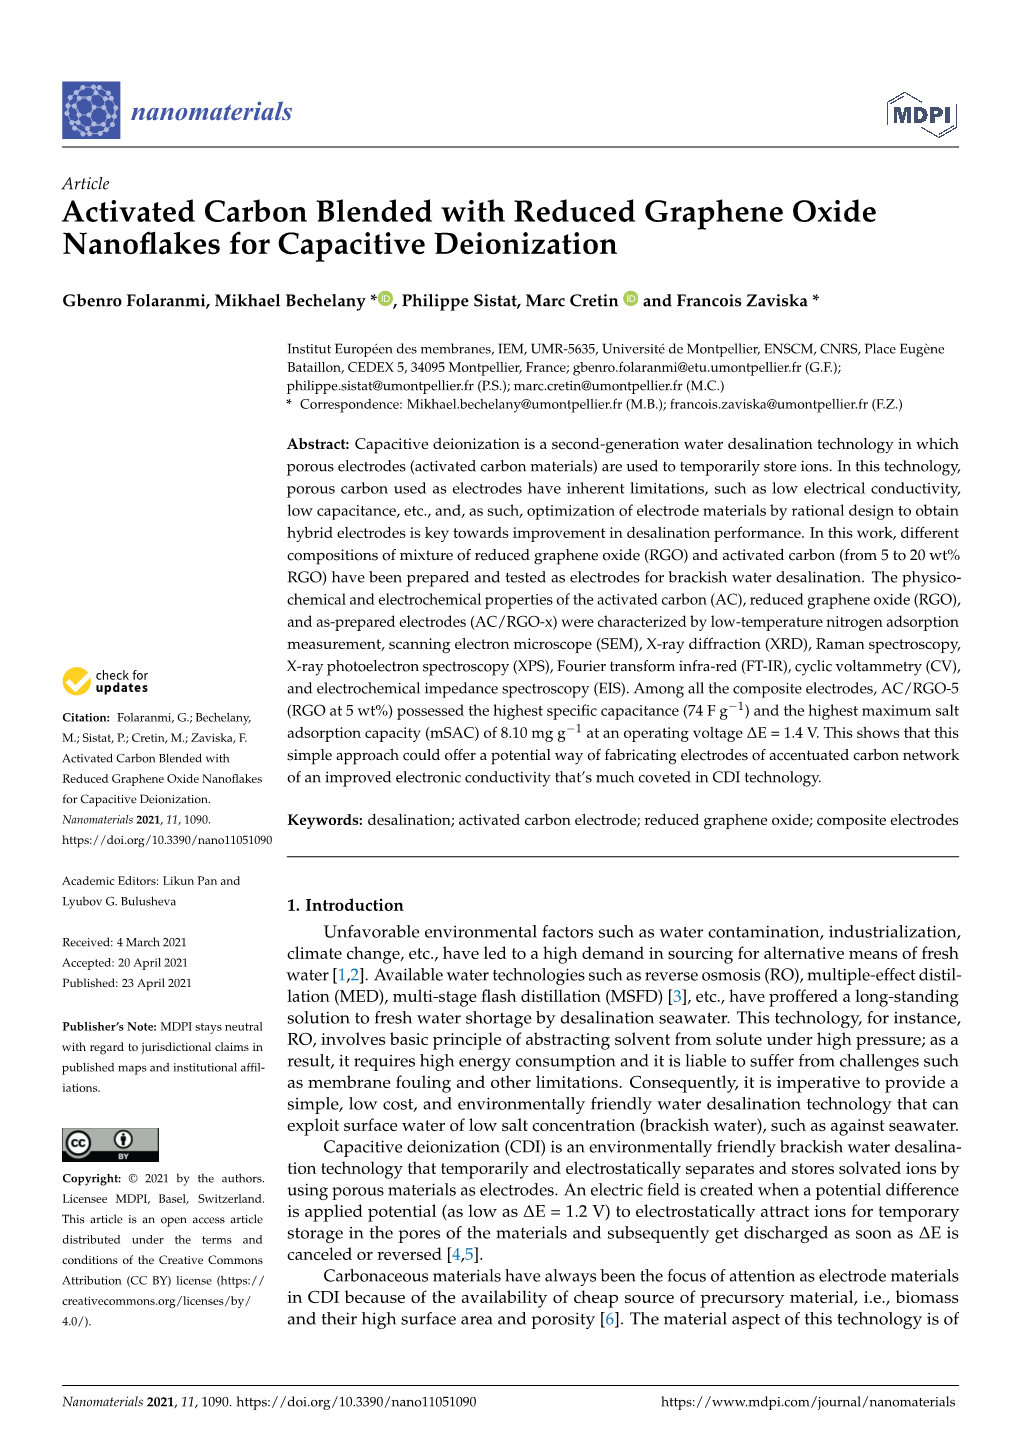 Activated Carbon Blended with Reduced Graphene Oxide Nanoﬂakes for Capacitive Deionization